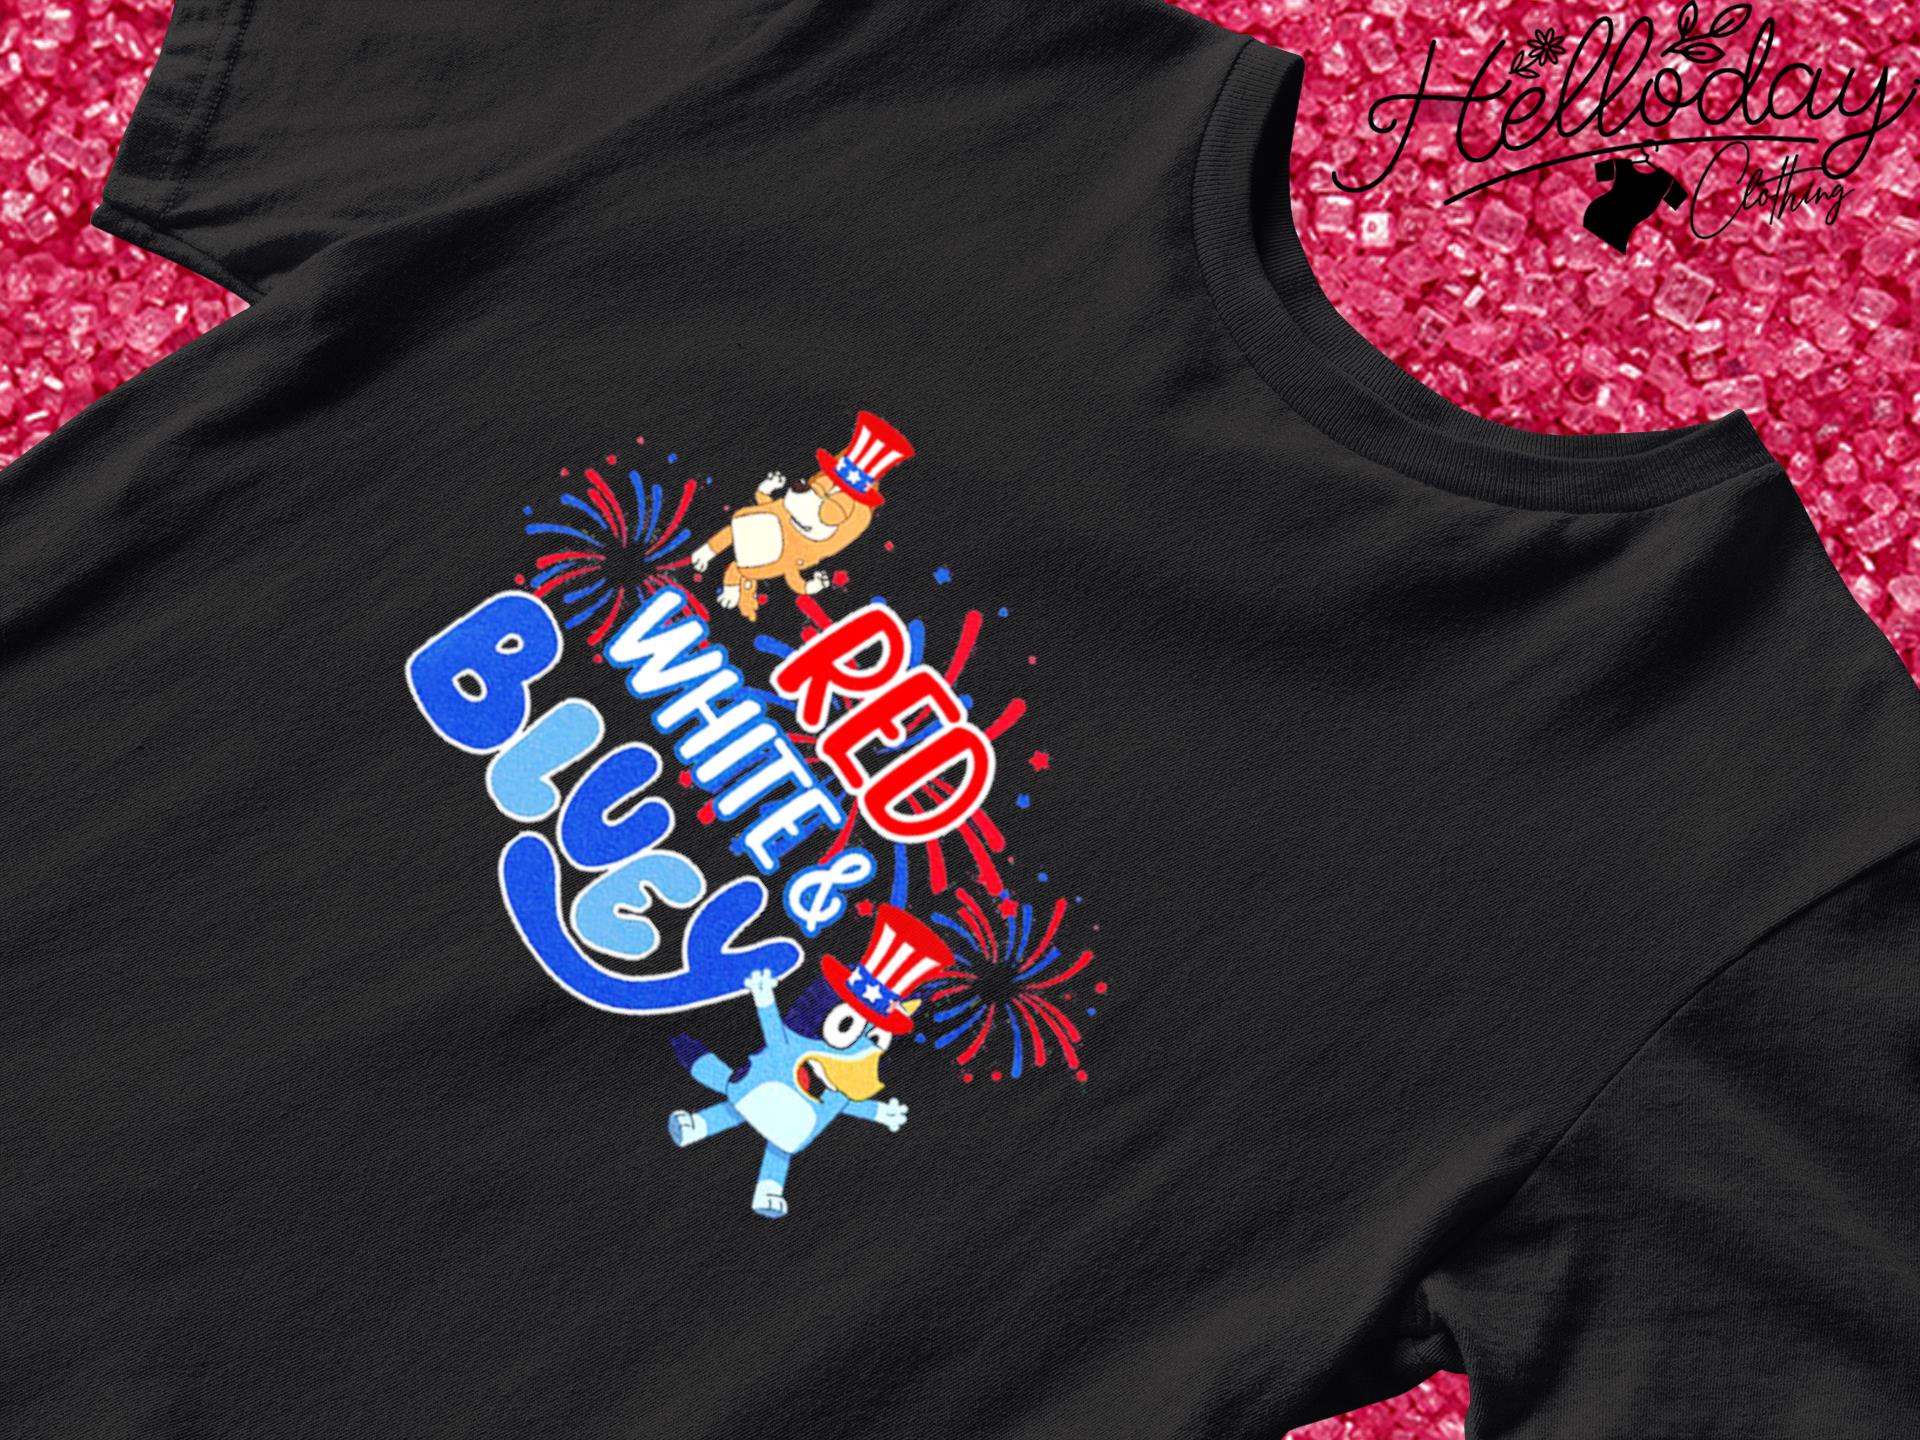 Red White and Bluey Fireworks shirt